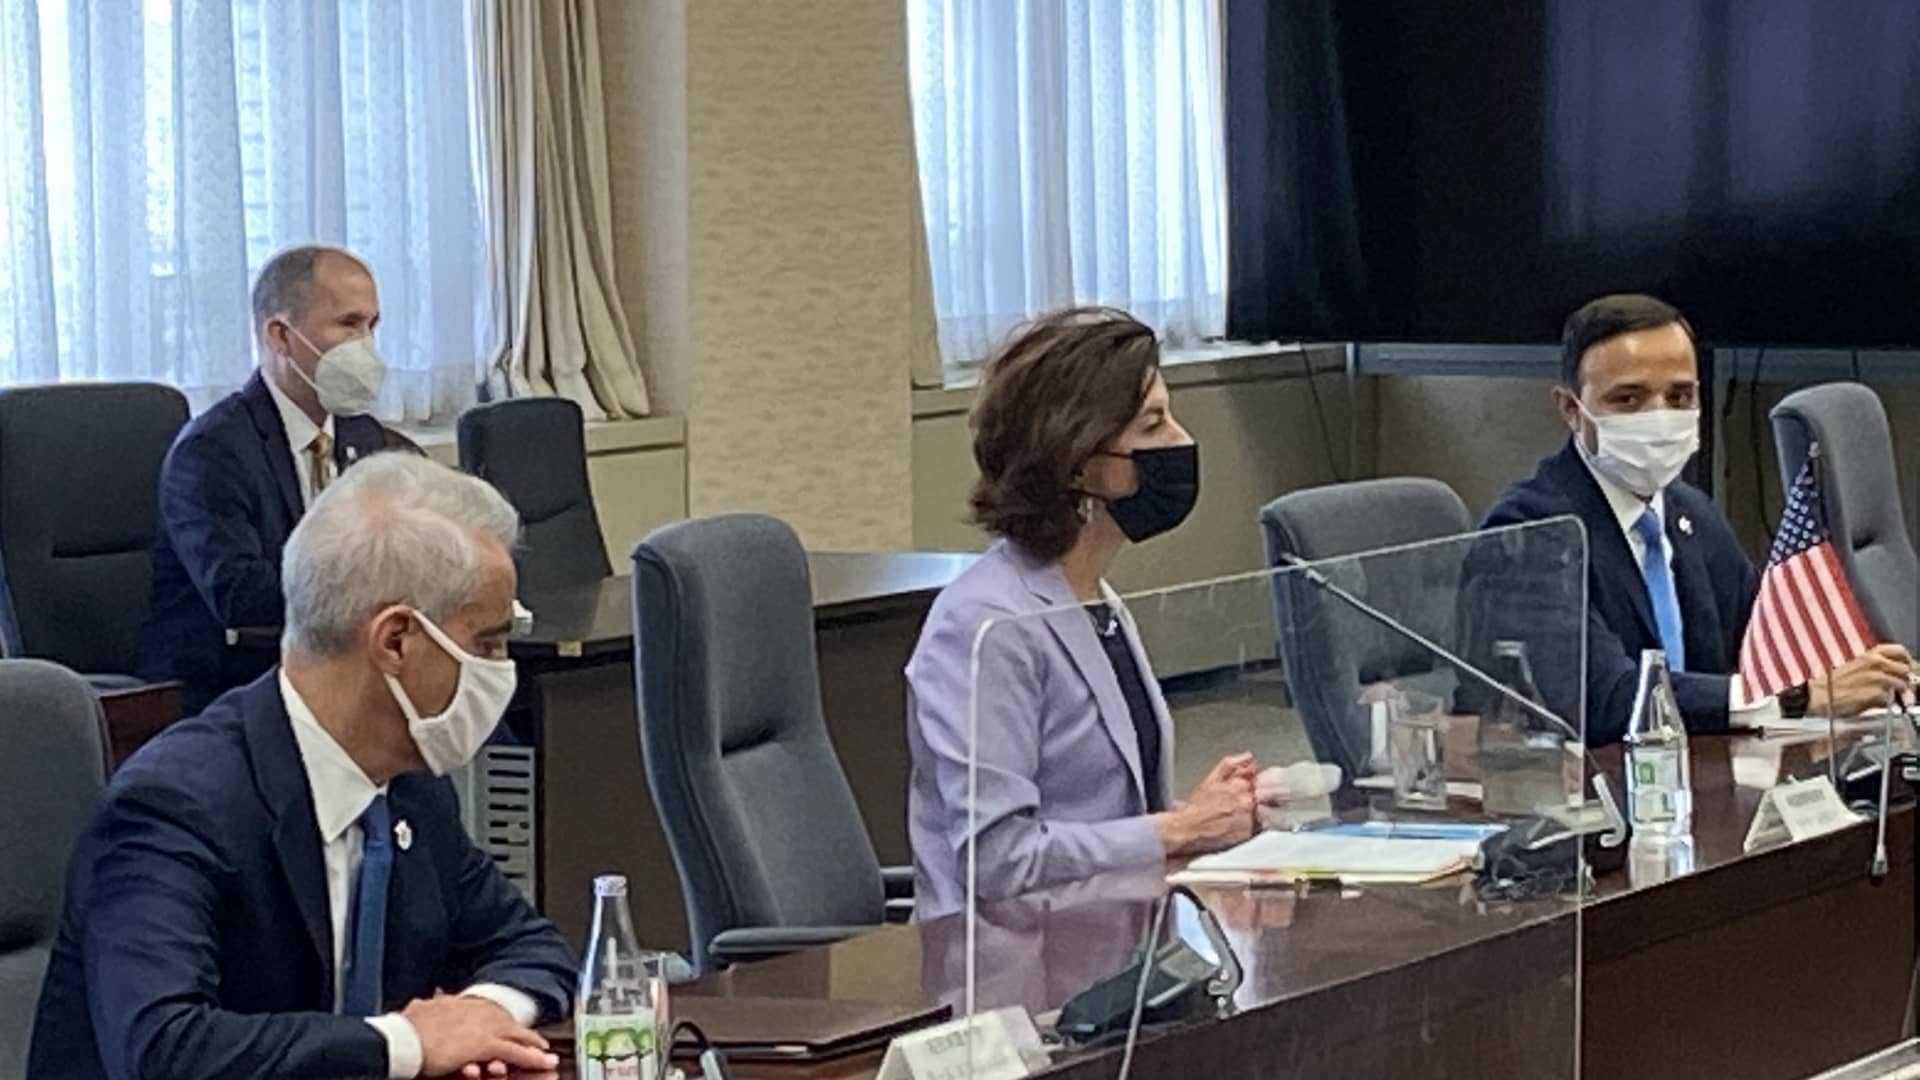 U.S. Commerce Secretary Gina Raimondo, center, met on Monday in Tokyo with Japan's trade minister, Koichi Hagiuda. The two democracies are working to shore up their alliance against a backdrop of economic uncertainty around the world. U.S. Ambassador to Japan Rahm Emanuel is at left.